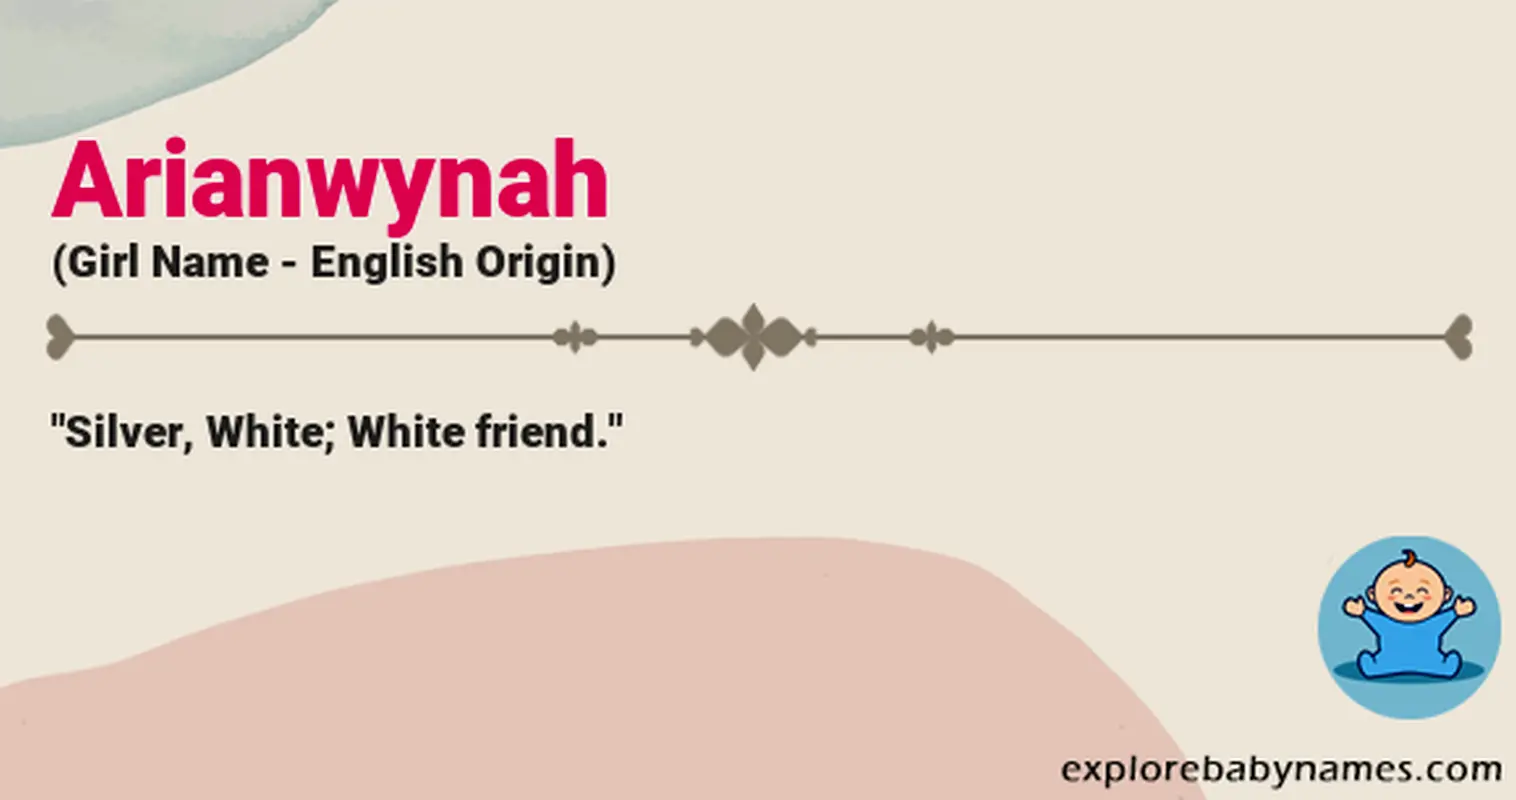 Meaning of Arianwynah